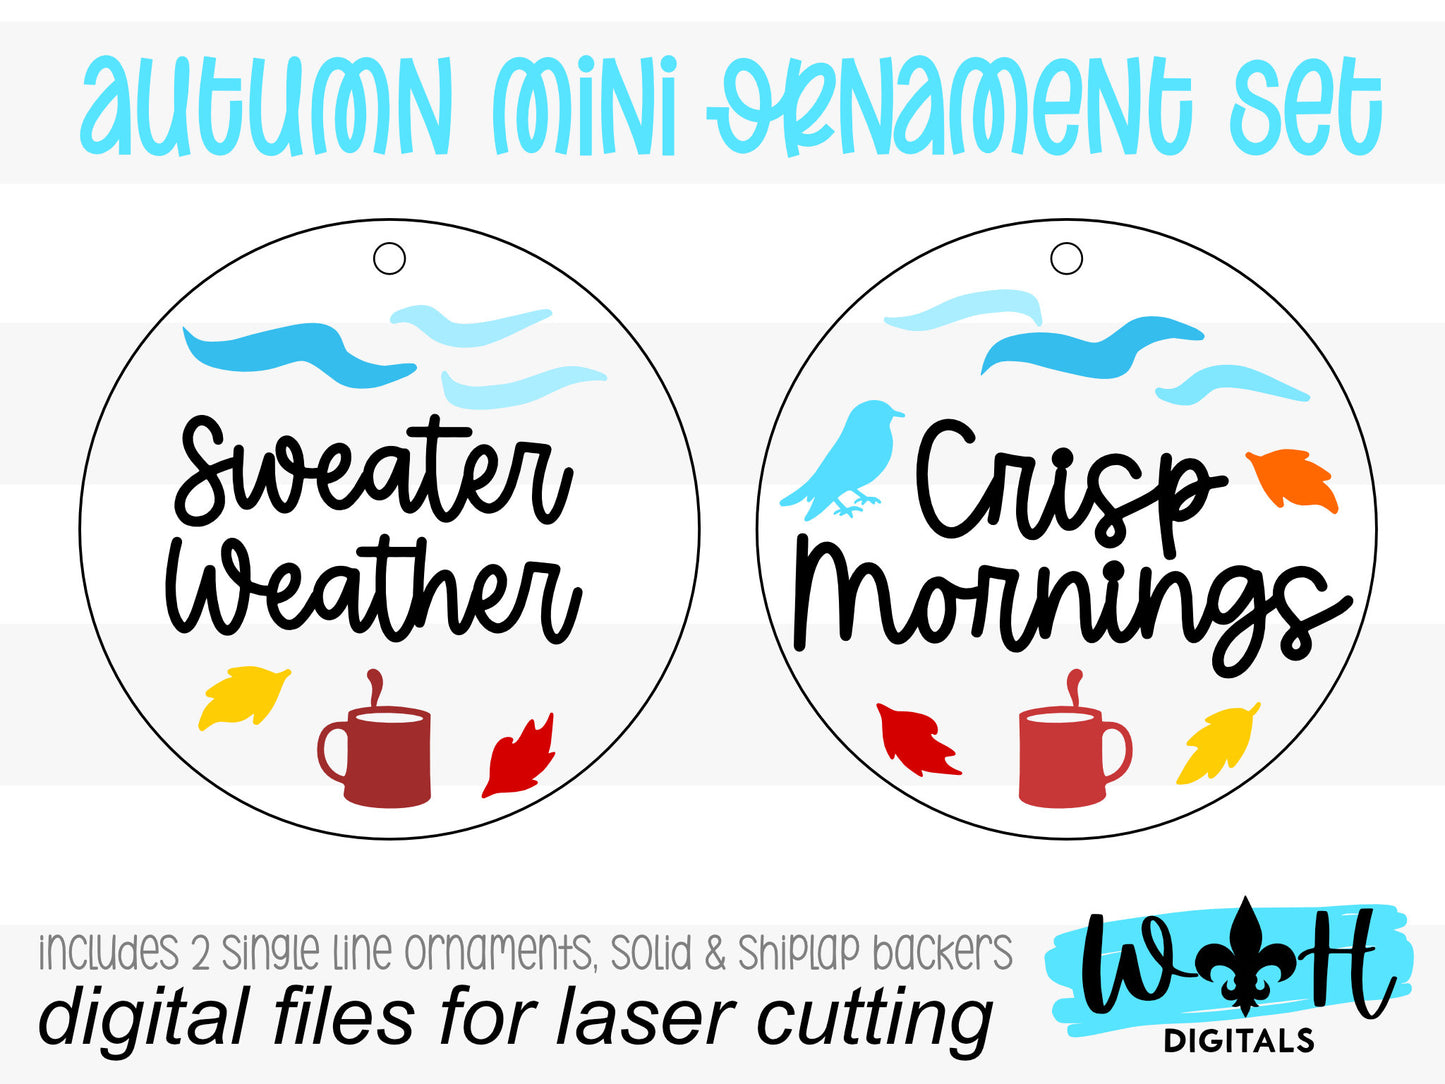 Sweater Weather and Crisp Mornings Fall Traditions Mini Ornament Set - Files for Cutting Machines and Glowforge Lasers - Digital SVG File